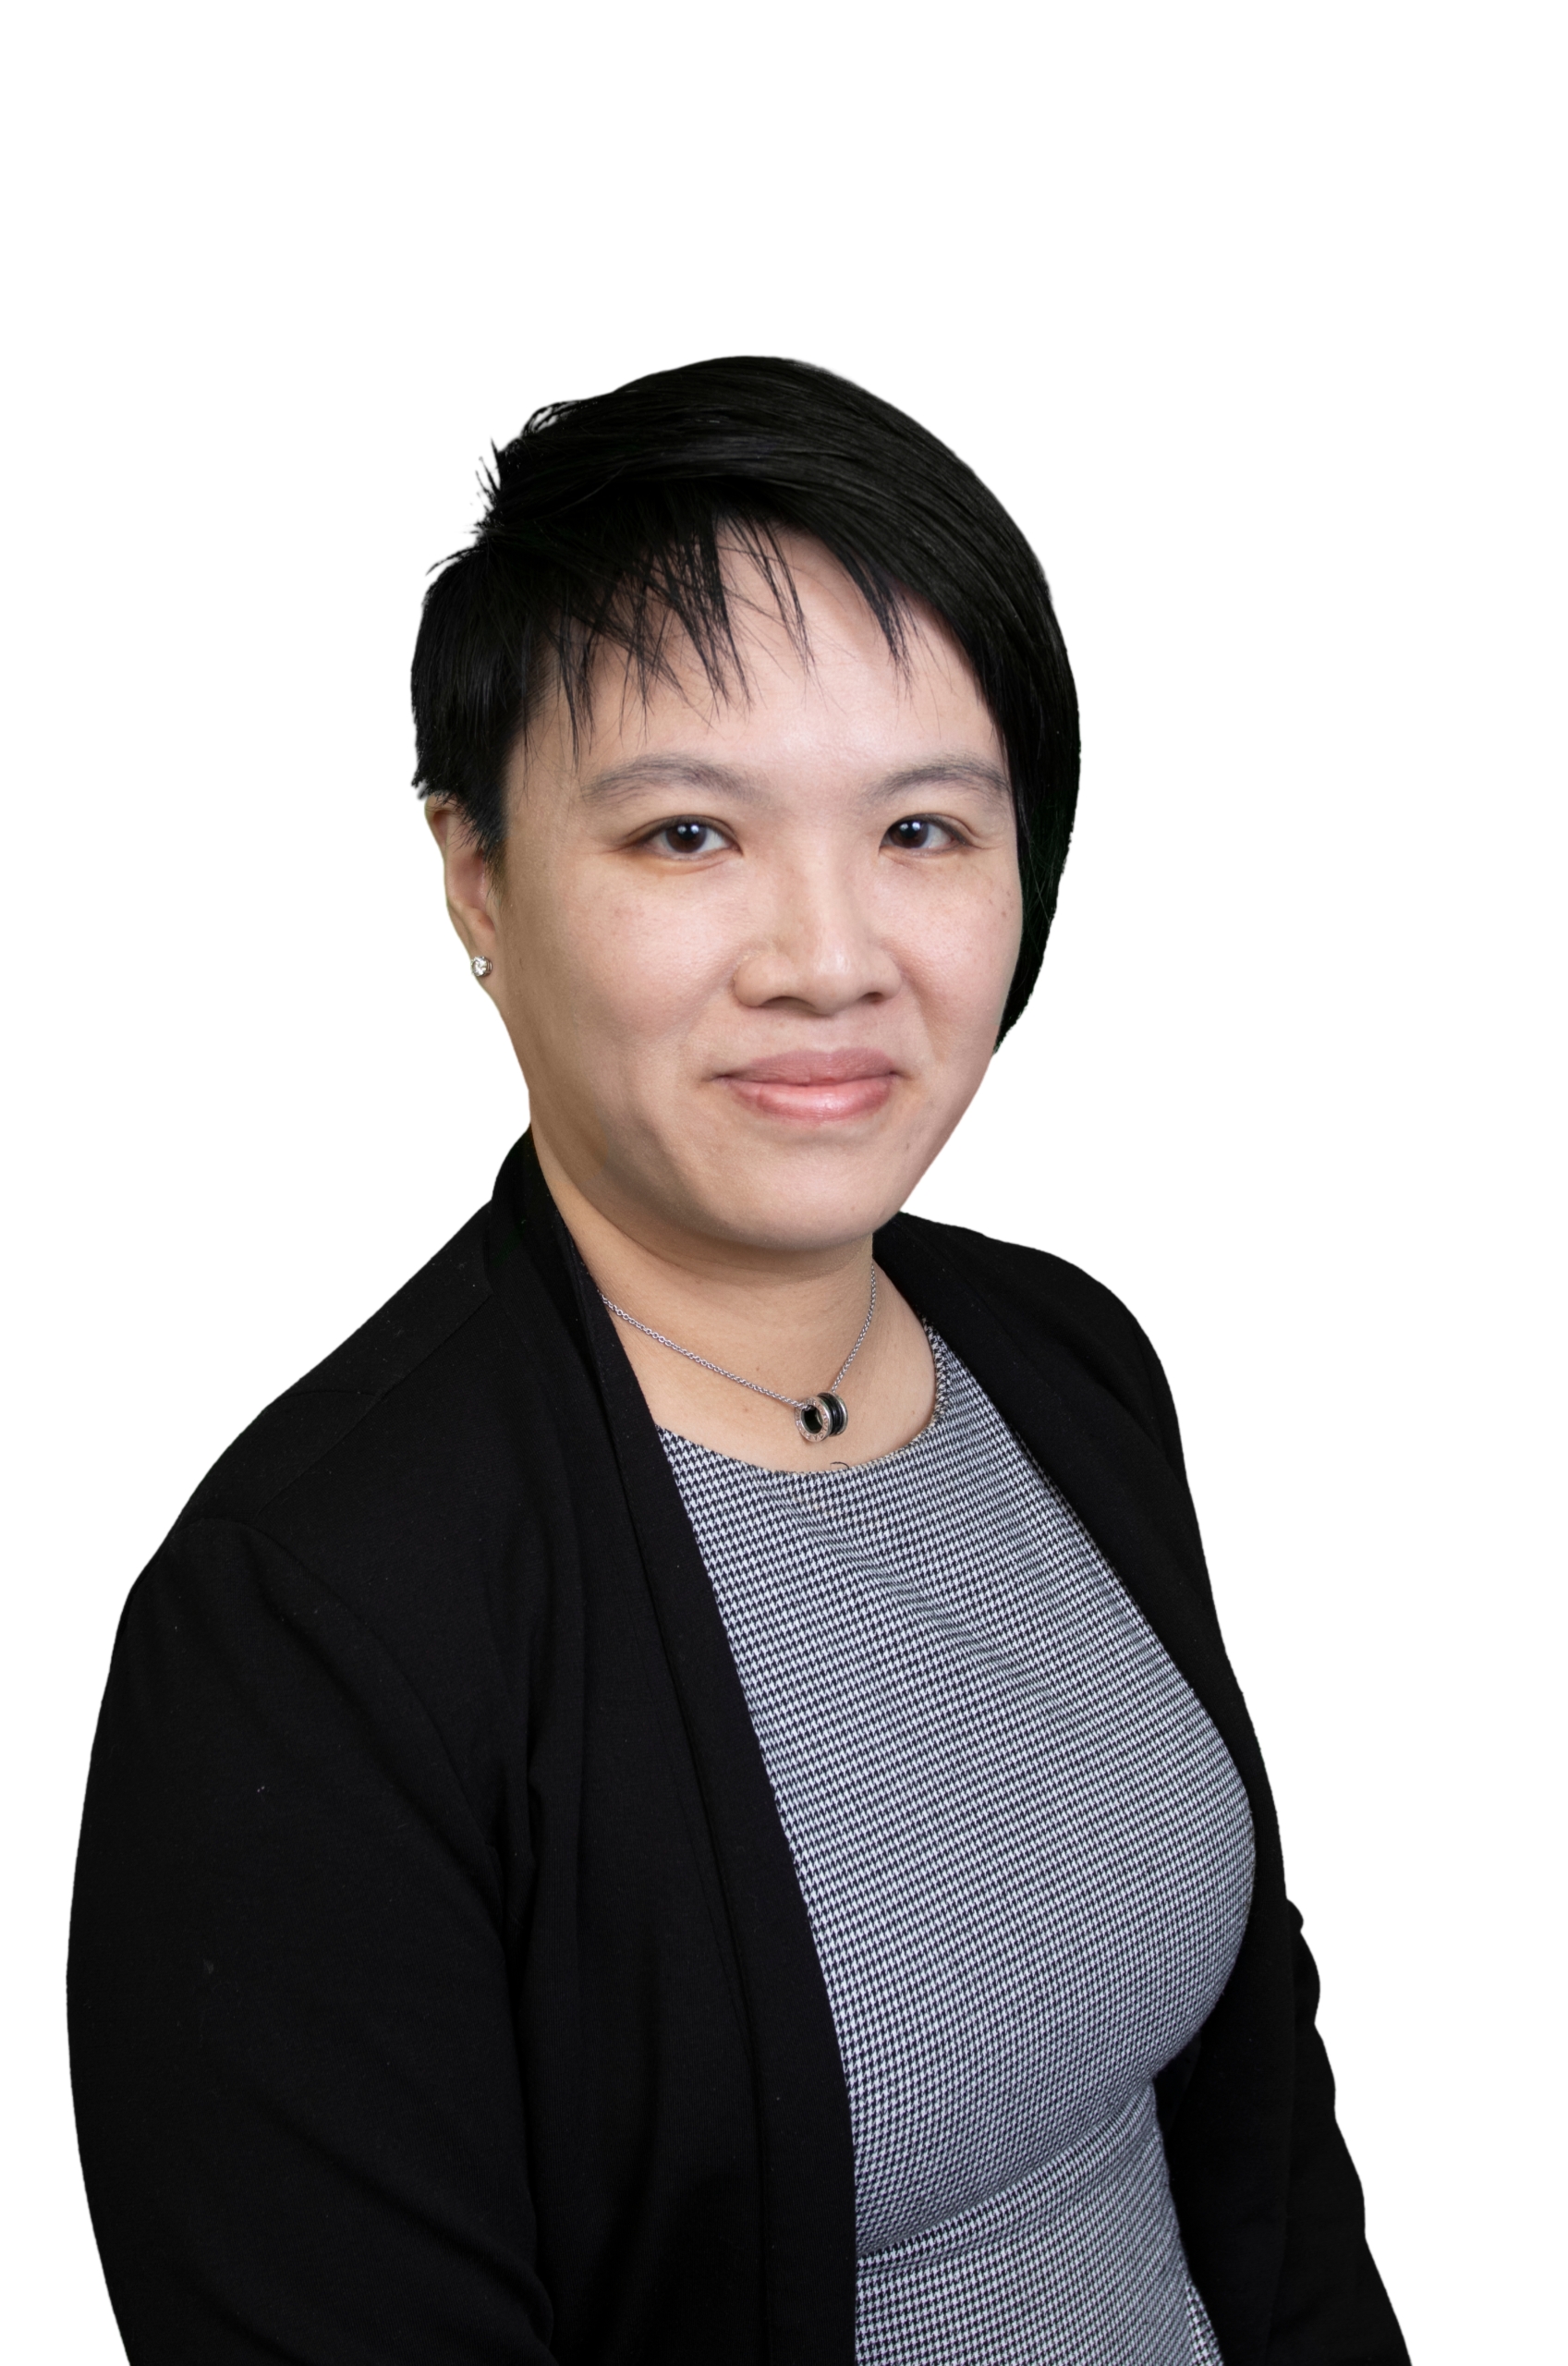 Realtor for North Shore in West Vancouver and North Vancouver Speaking 3 Languages: English, Mandarin, and Cantonese.